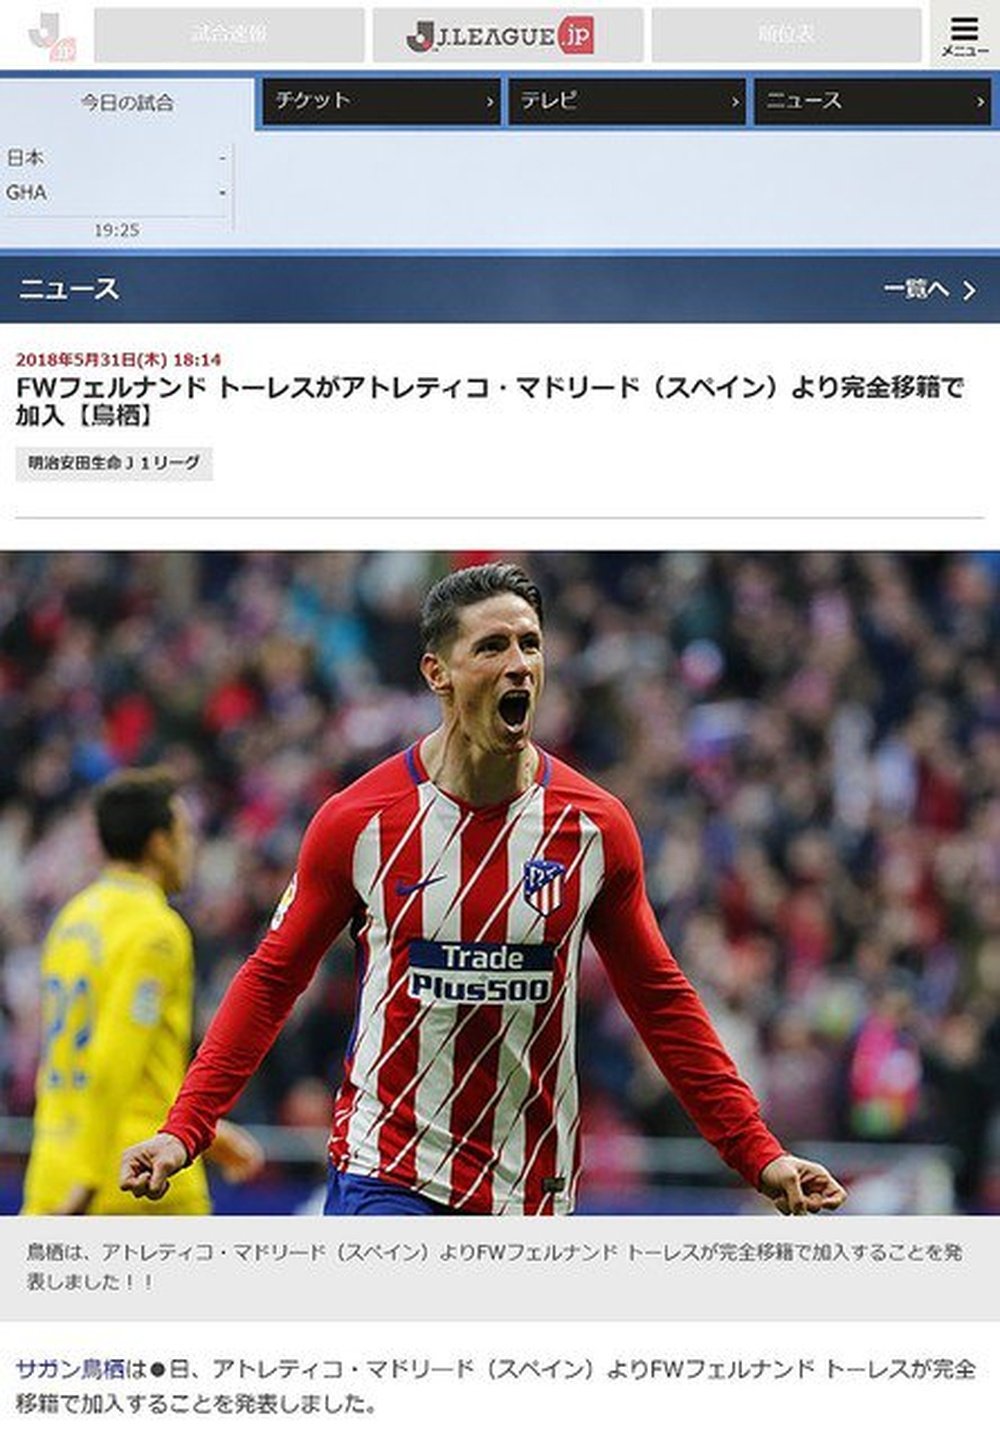 Image of the website of the J-League supposedly confirming Torres's move. JLeagueJP